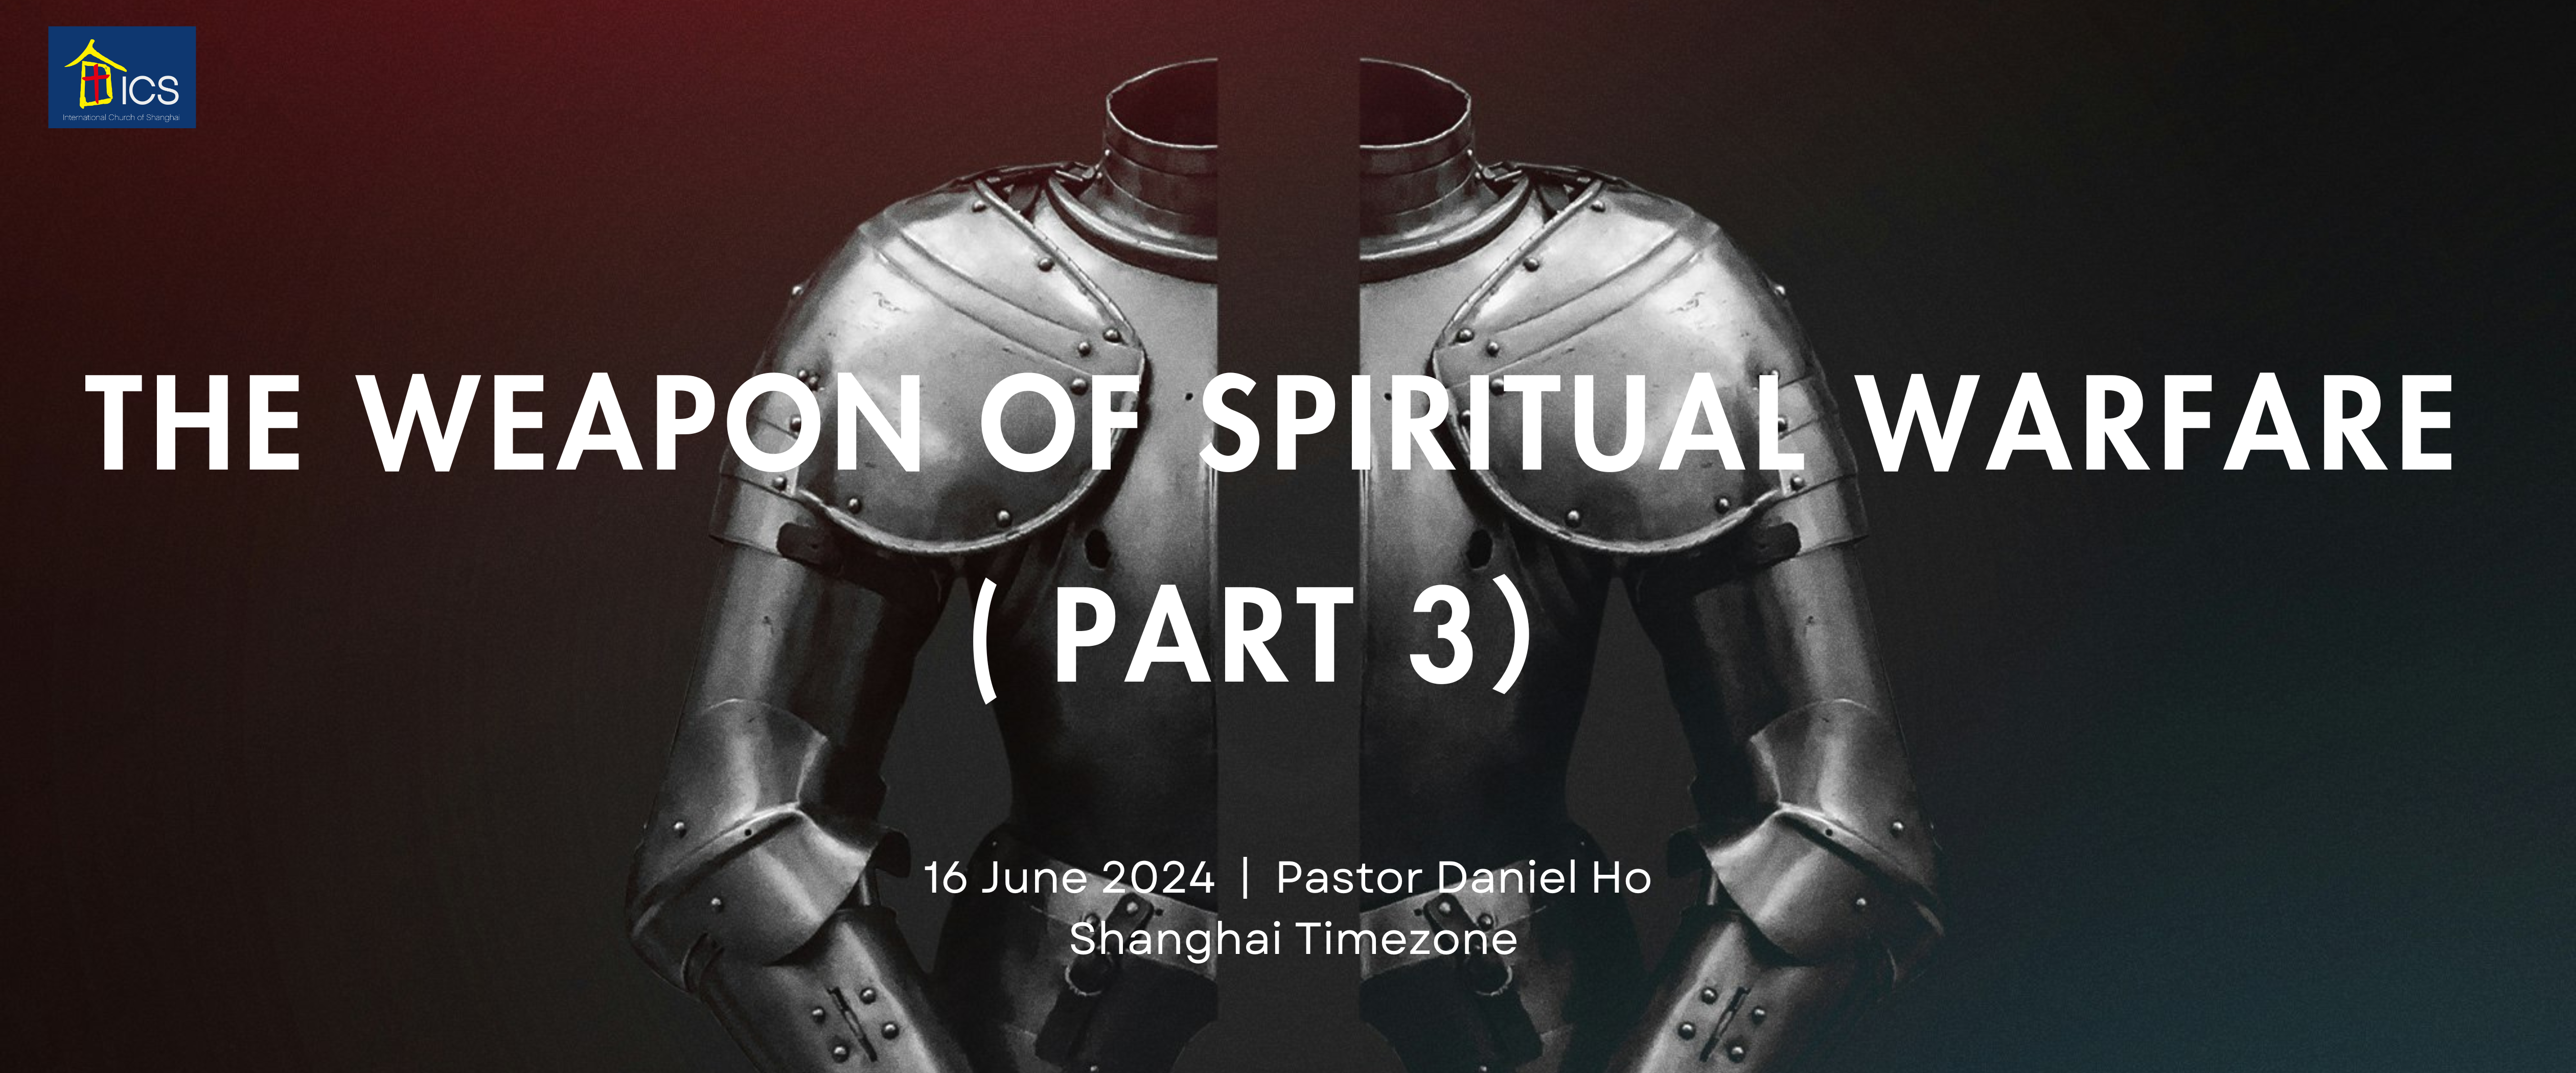 THE WEAPON OF OUR SPIRITUAL WARFARE (PART 3)